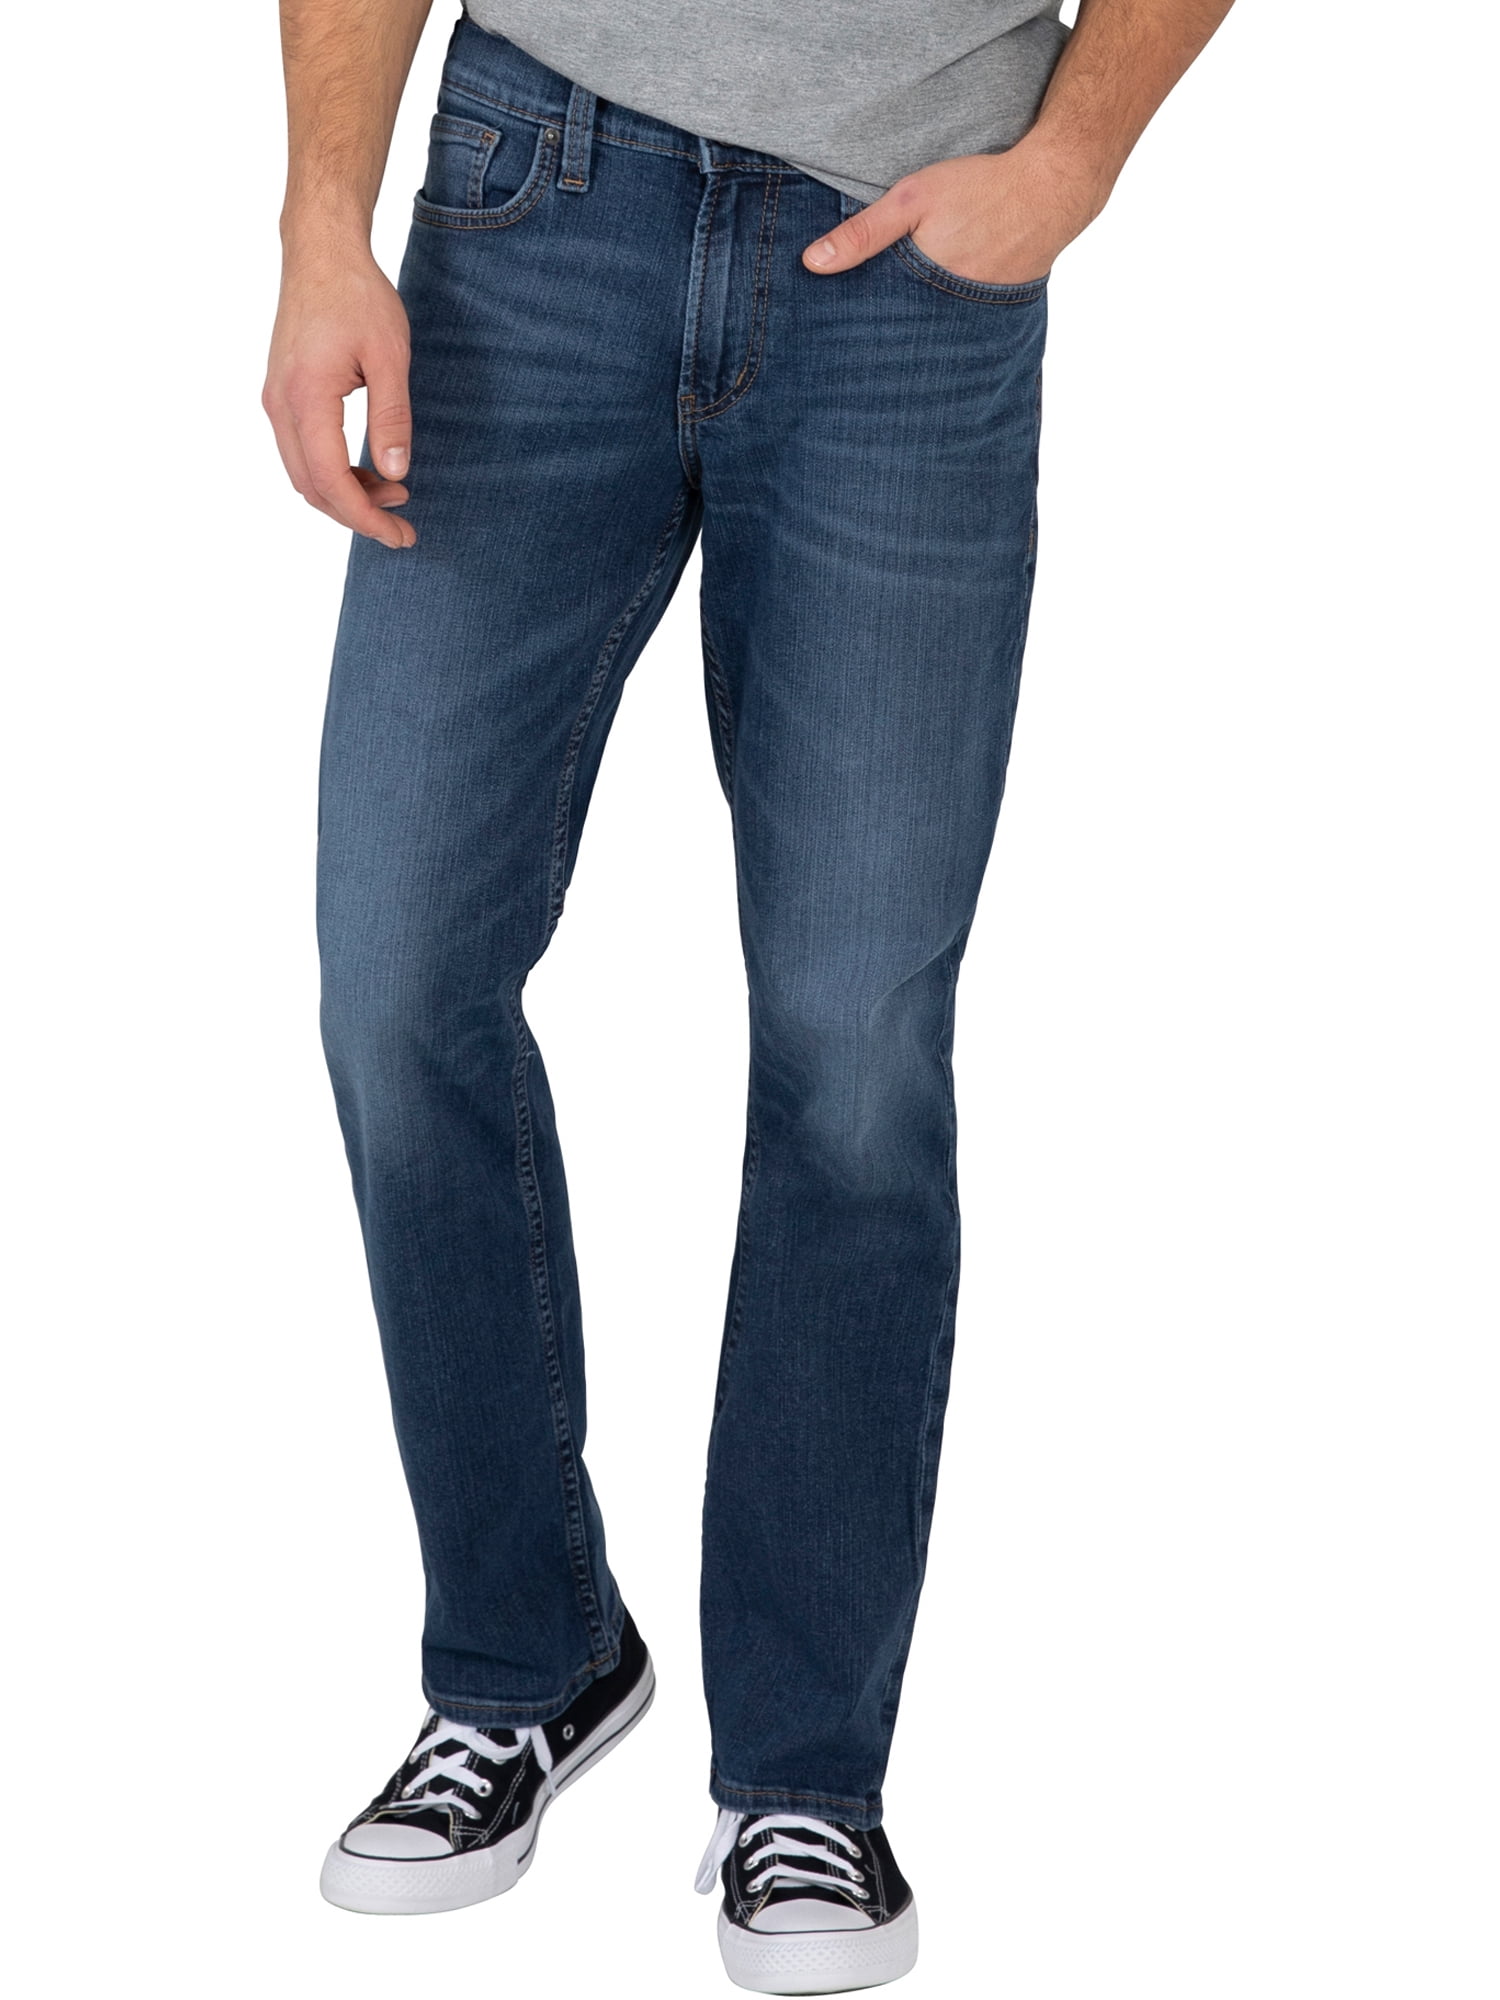 Authentic by Silver Jeans Co. Men's Relaxed Fit Straight Leg Jean ...